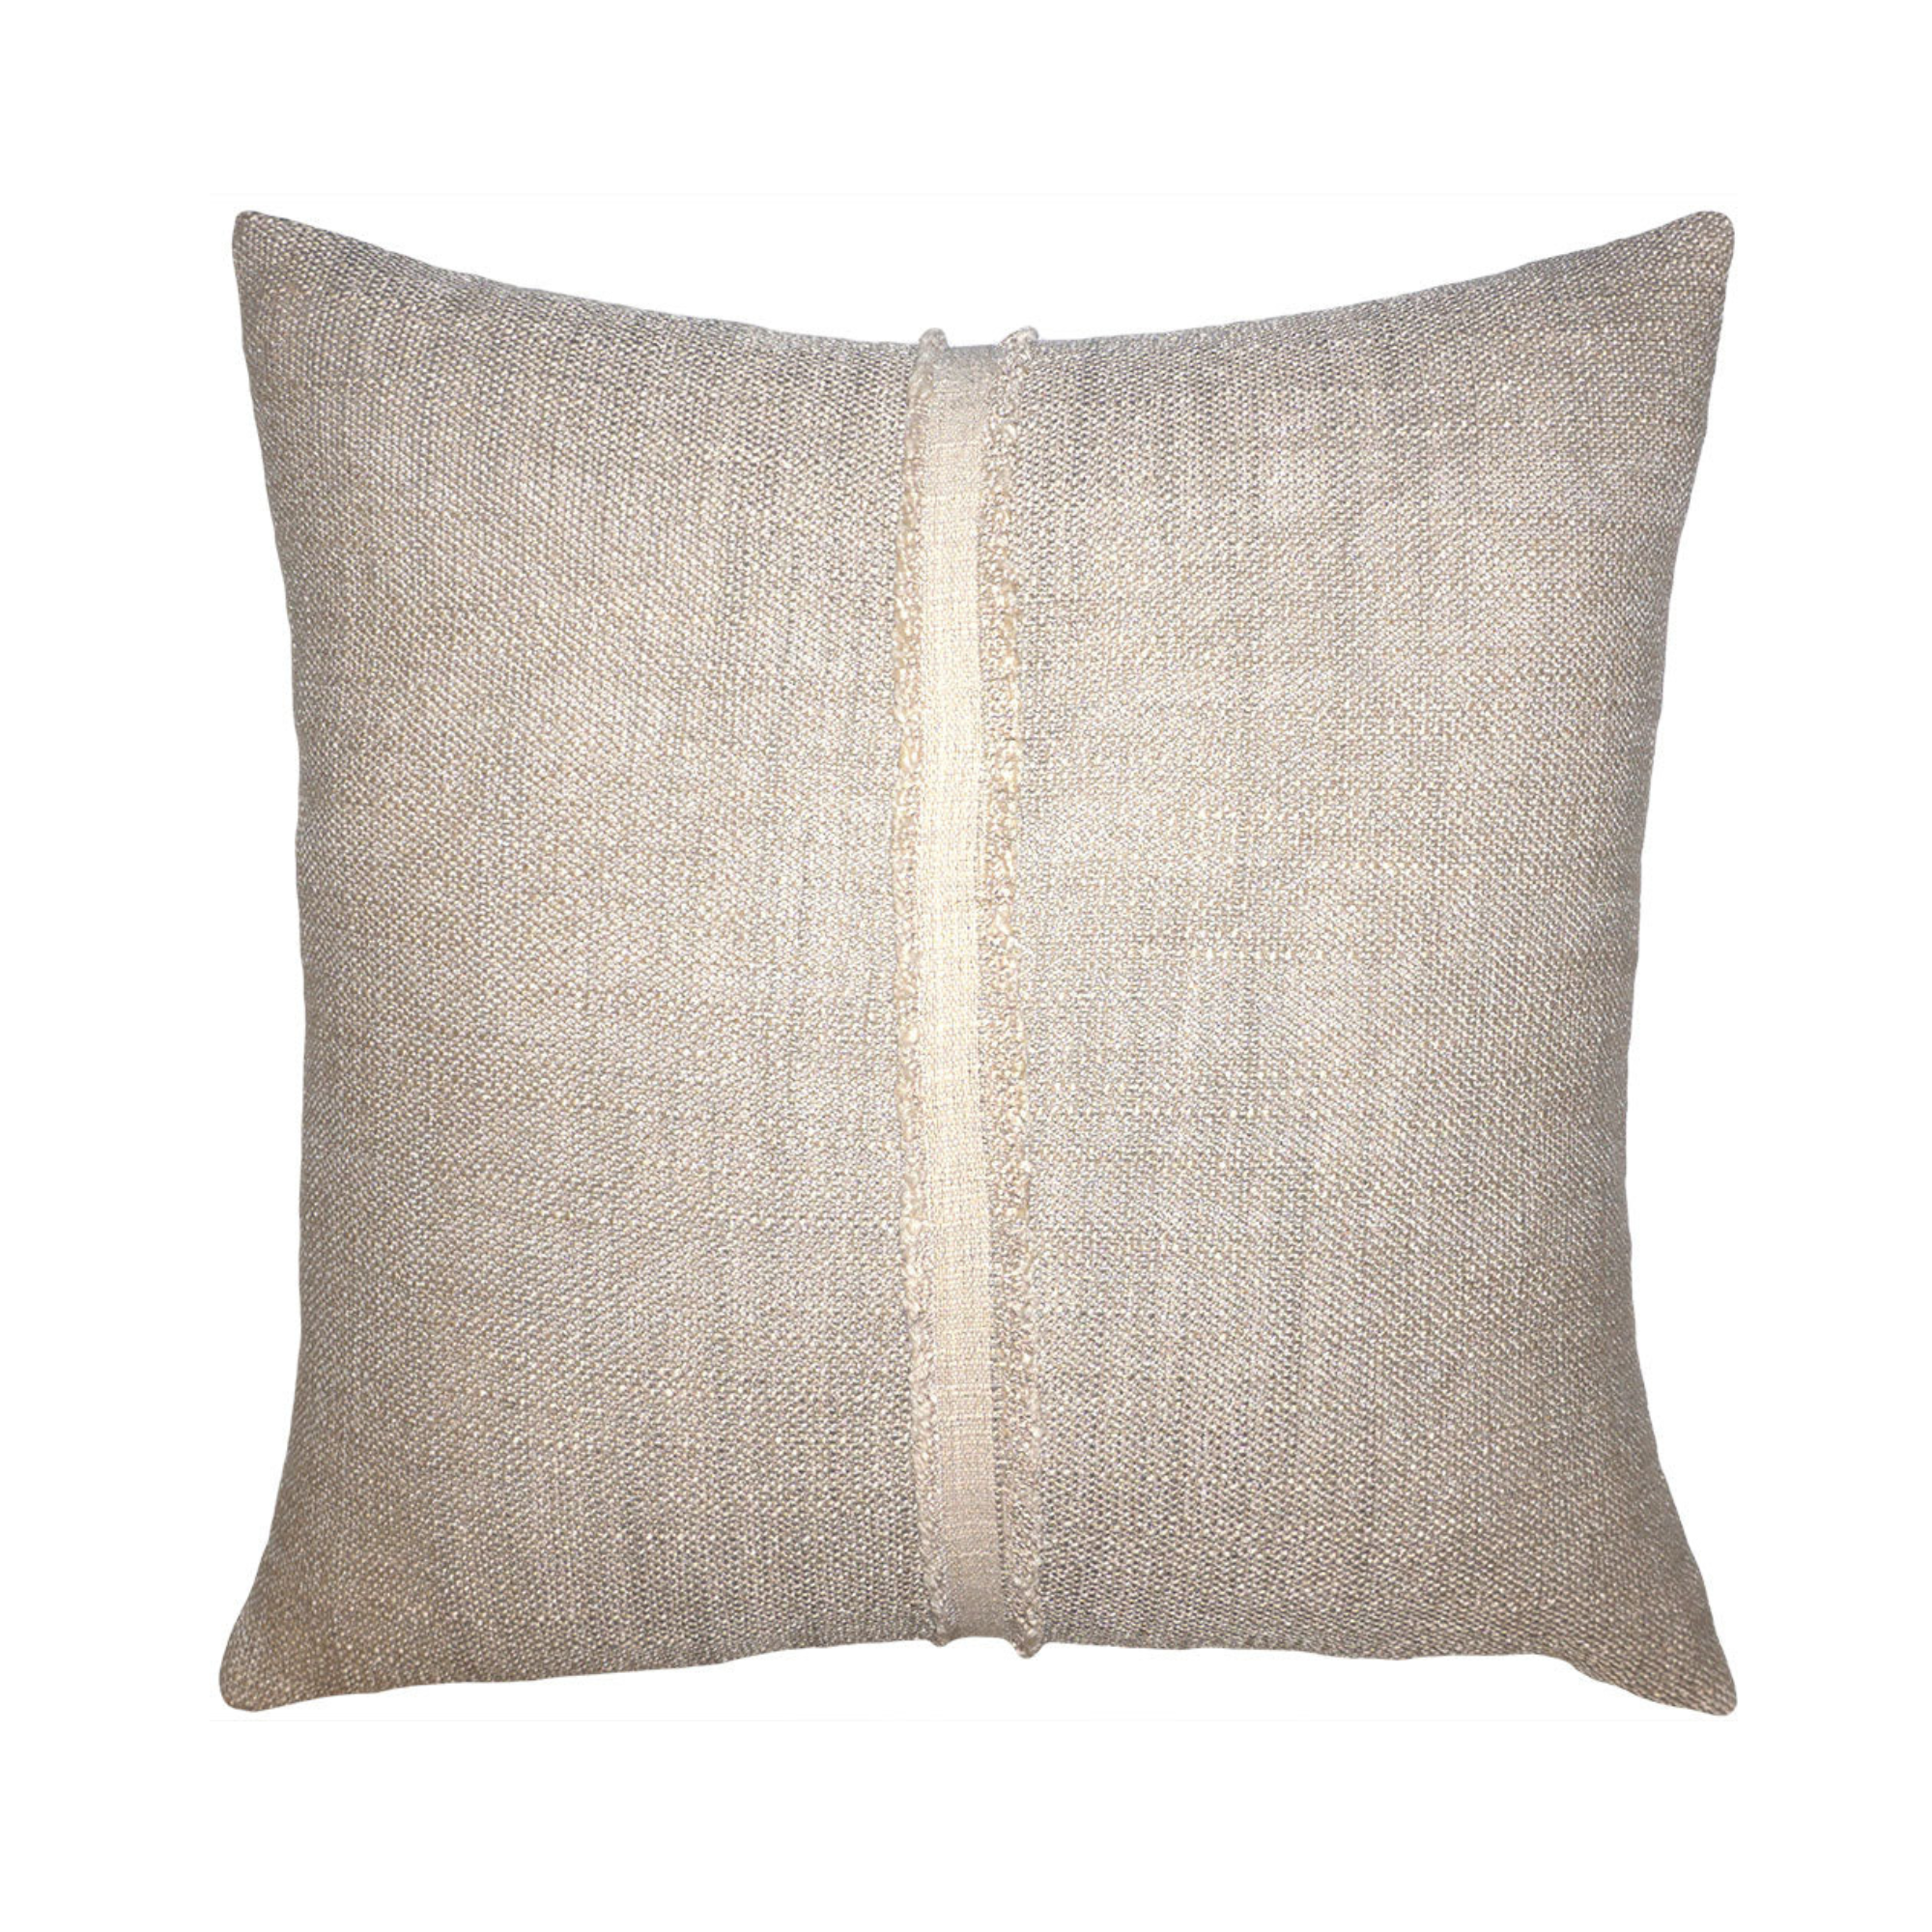 Hopsack Stitched Pillow